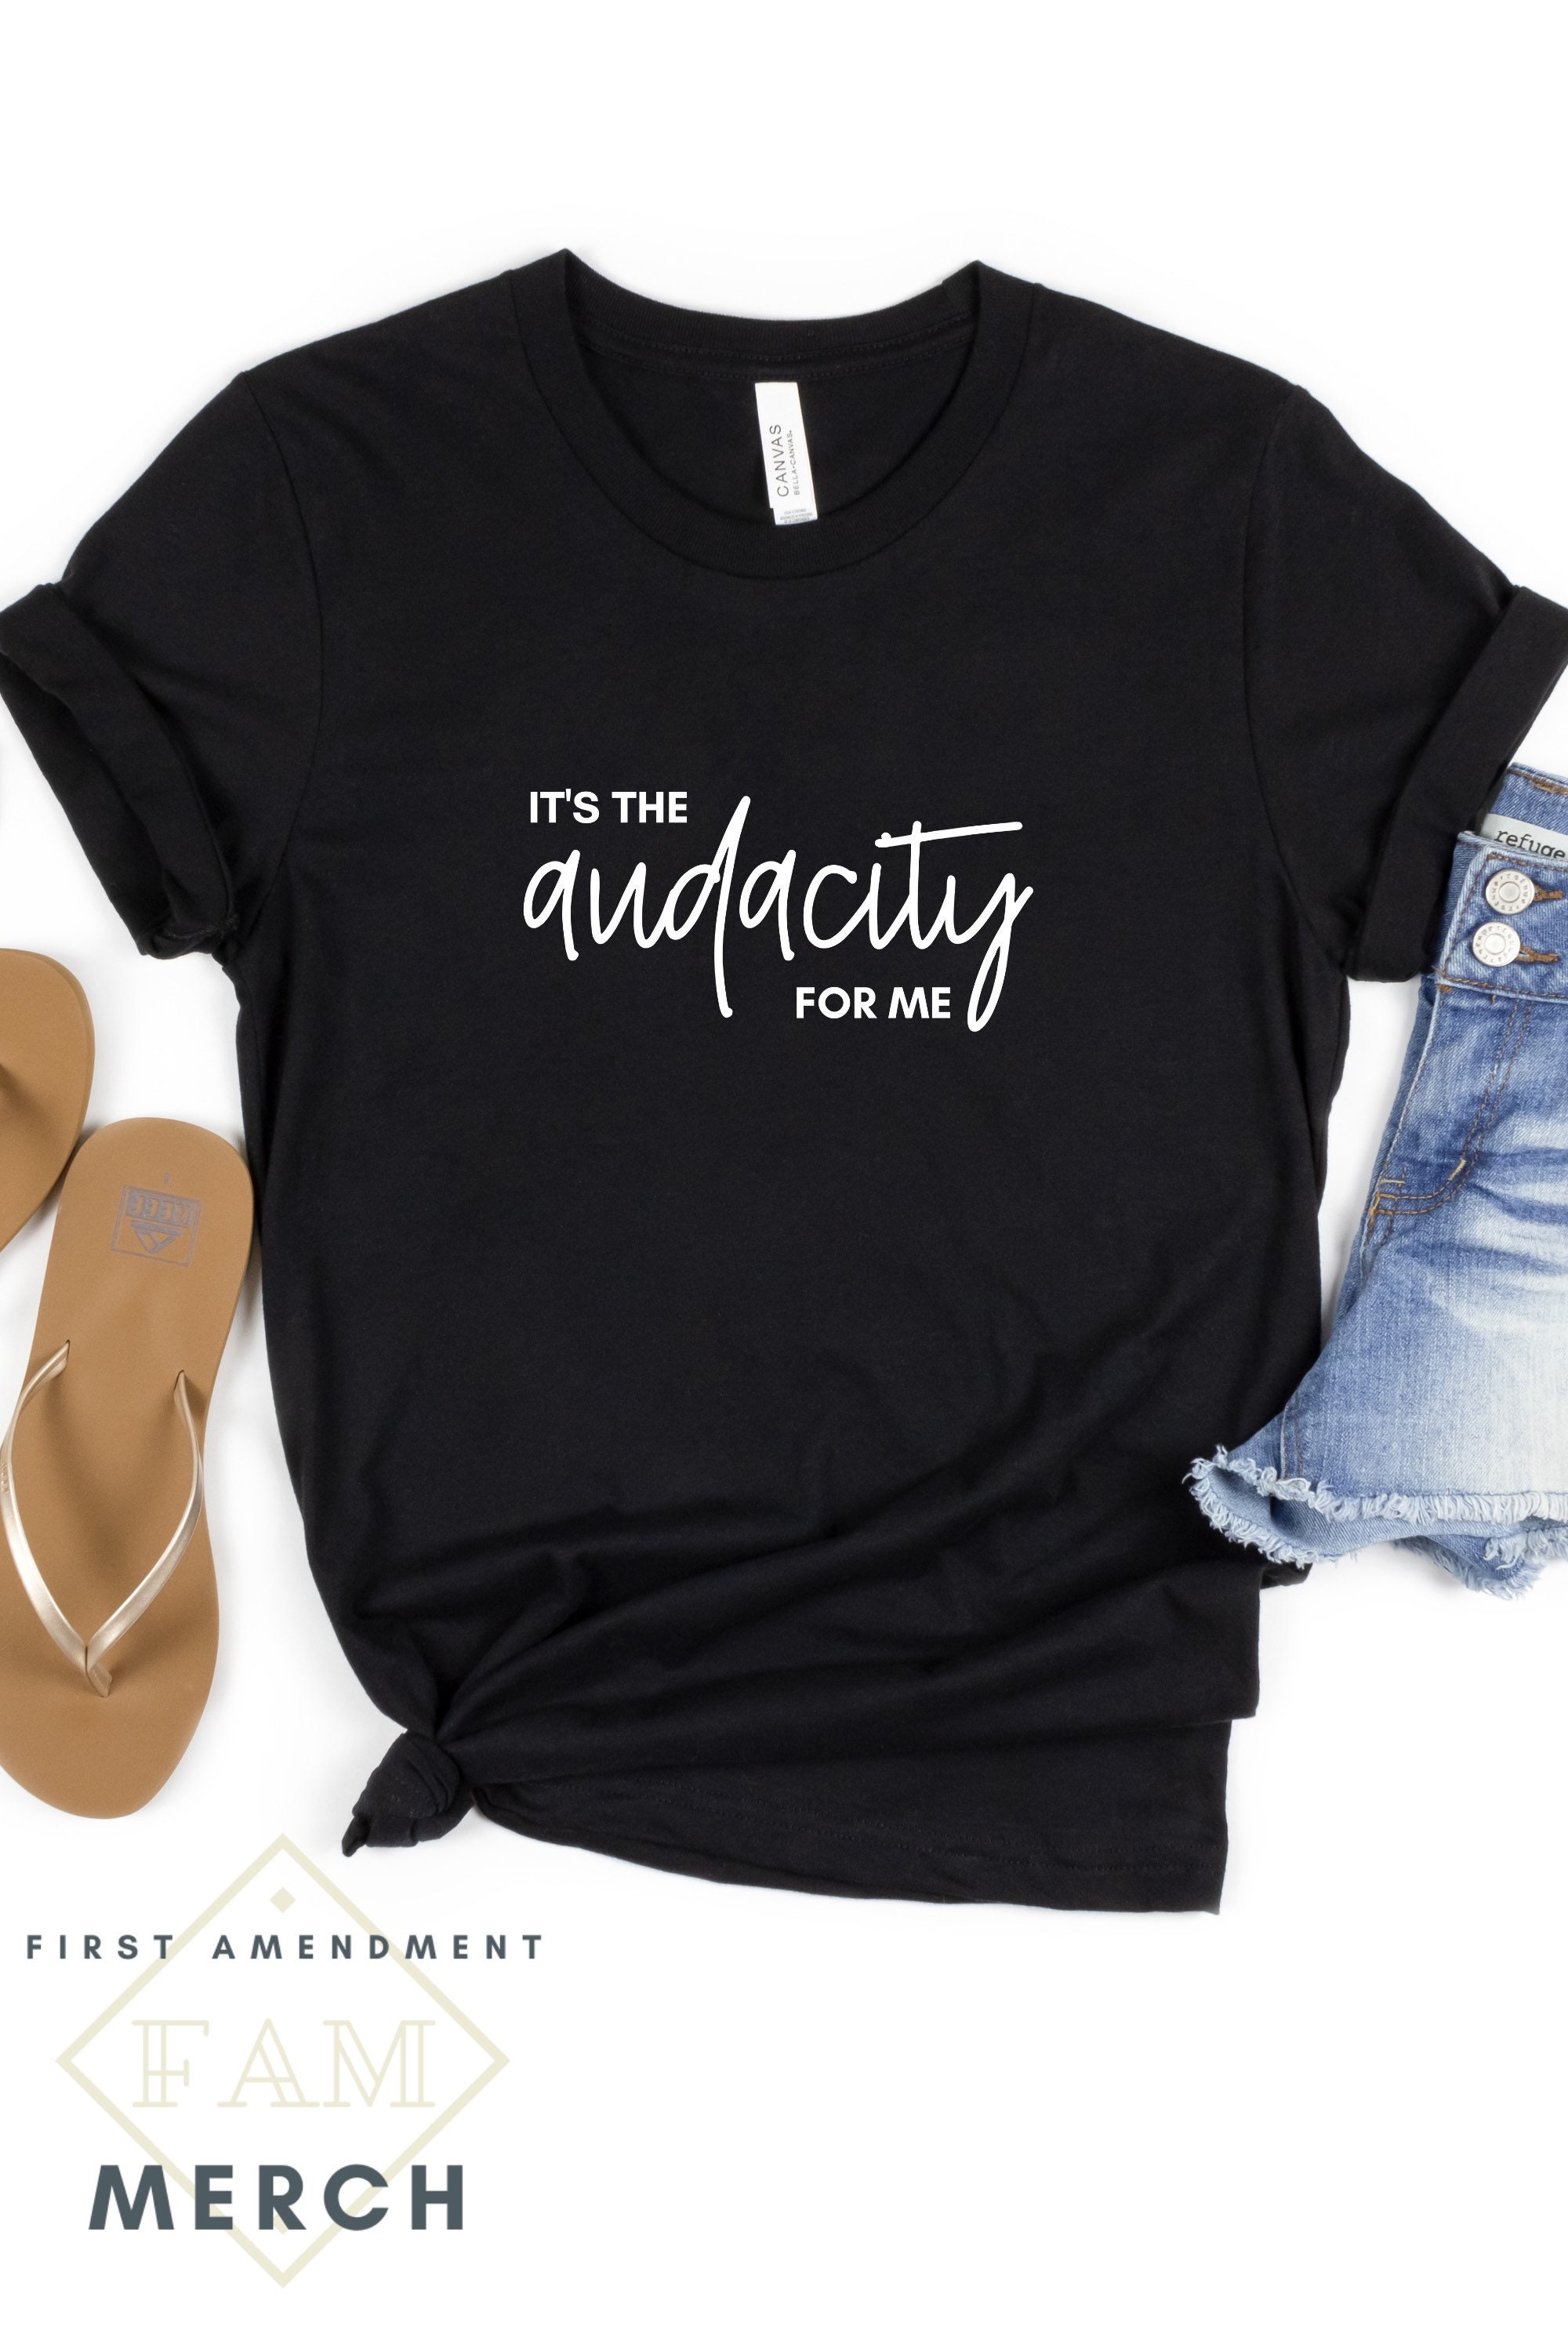 It's the Audacity for Me Shirt the Audacity Tee - Etsy Singapore